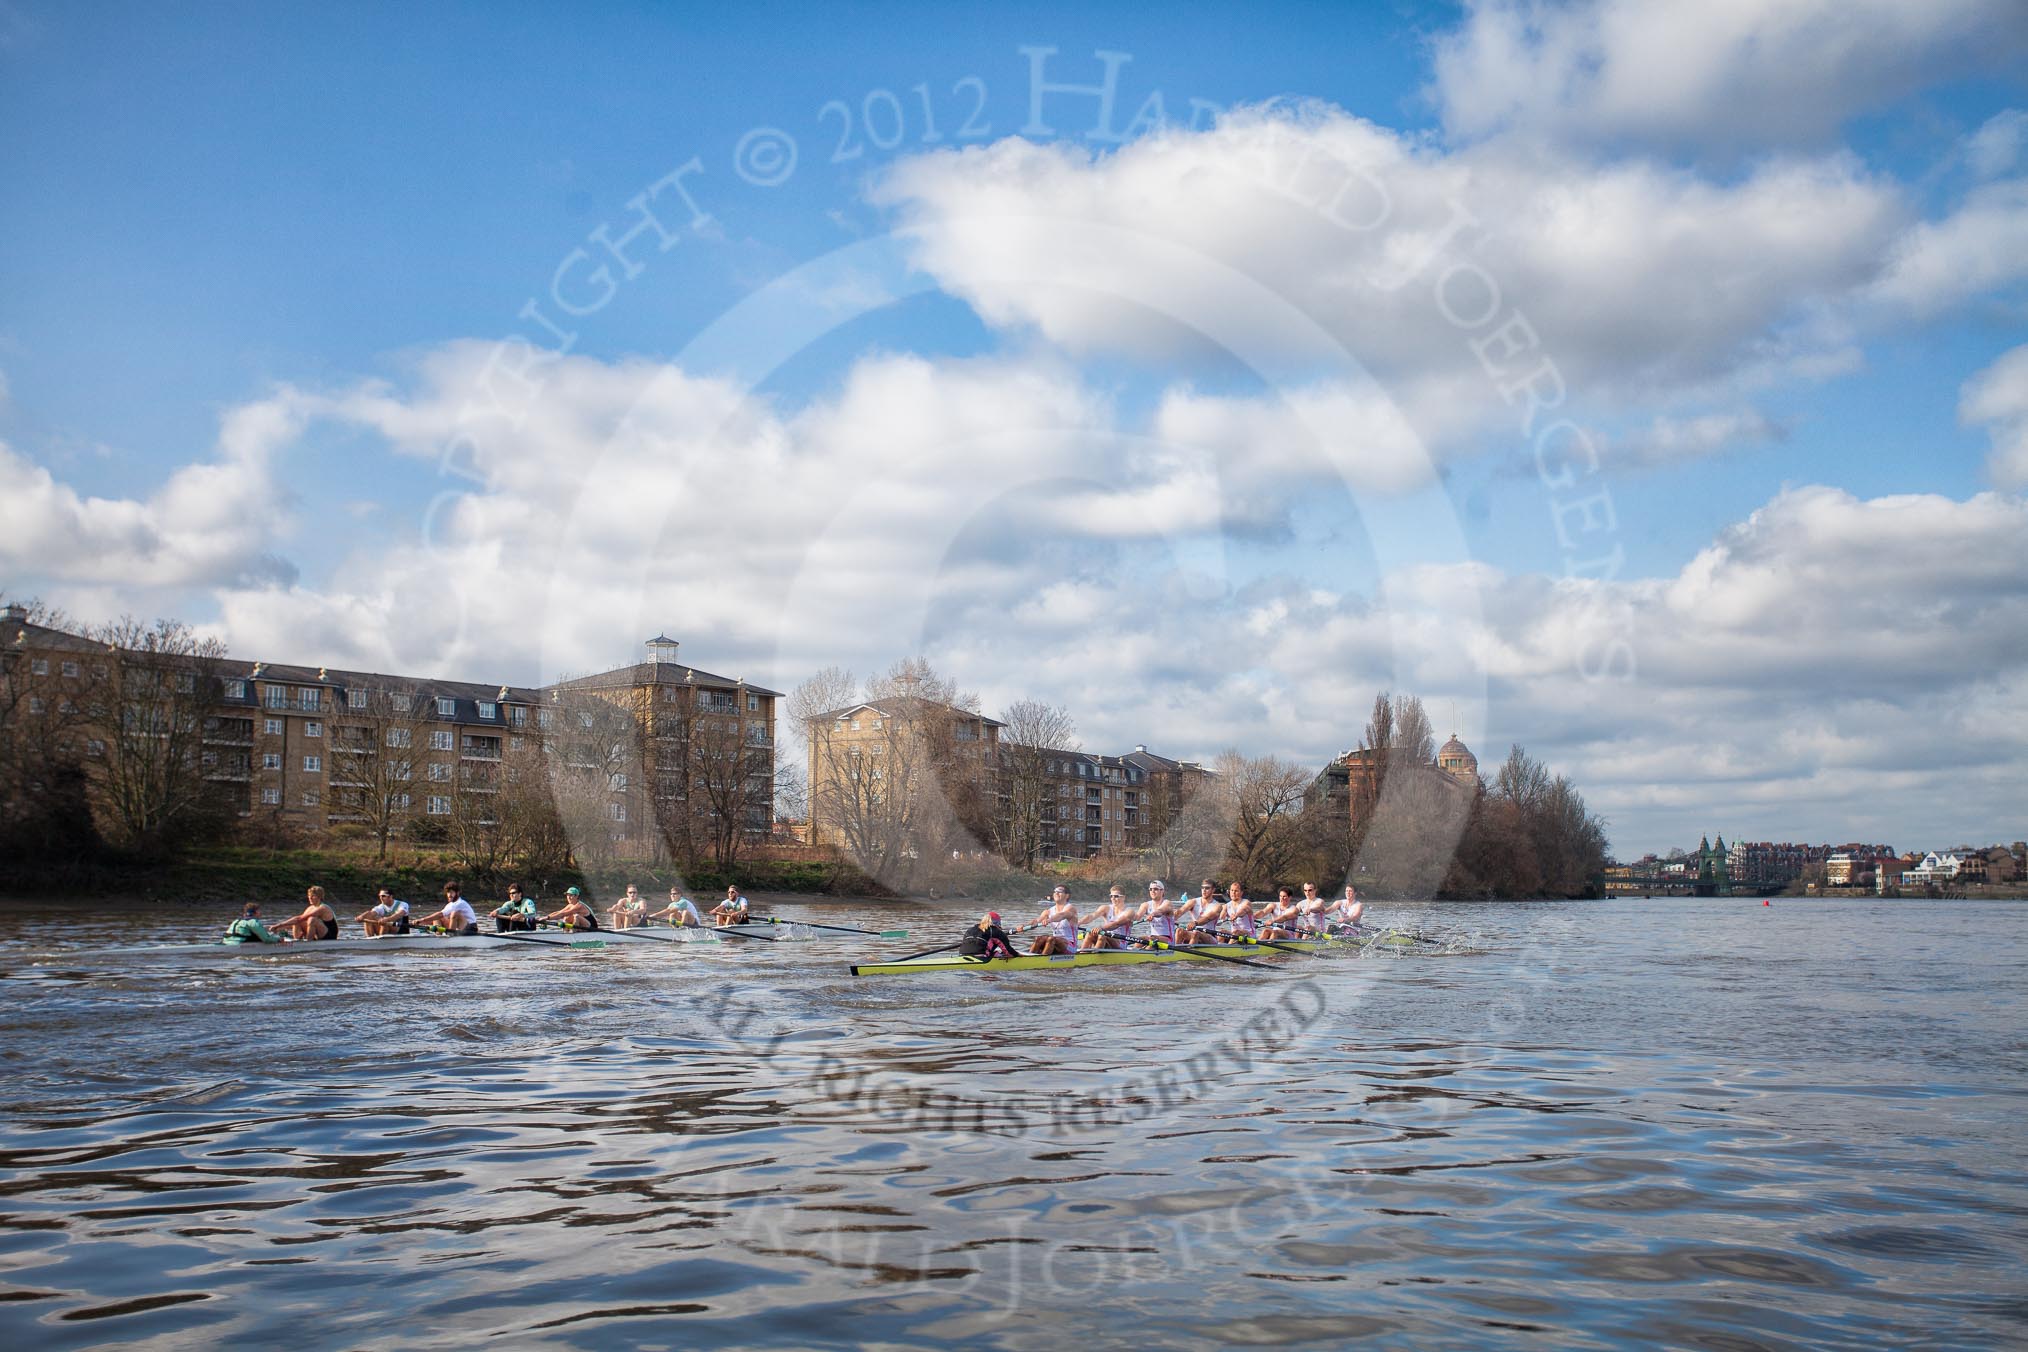 The Boat Race season 2012 - fixture CUBC vs Leander: CUBC (left) and Leander Club Eight reaching the Mile Post on the way to the Surrey Bend, with Hammersmith Bridge in the background. On the left Handel Mansions and Holst Mansions, followed by the Harrods Depository..
River Thames between Putney and Molesey,
London,
Greater London,
United Kingdom,
on 10 March 2012 at 14:17, image #127